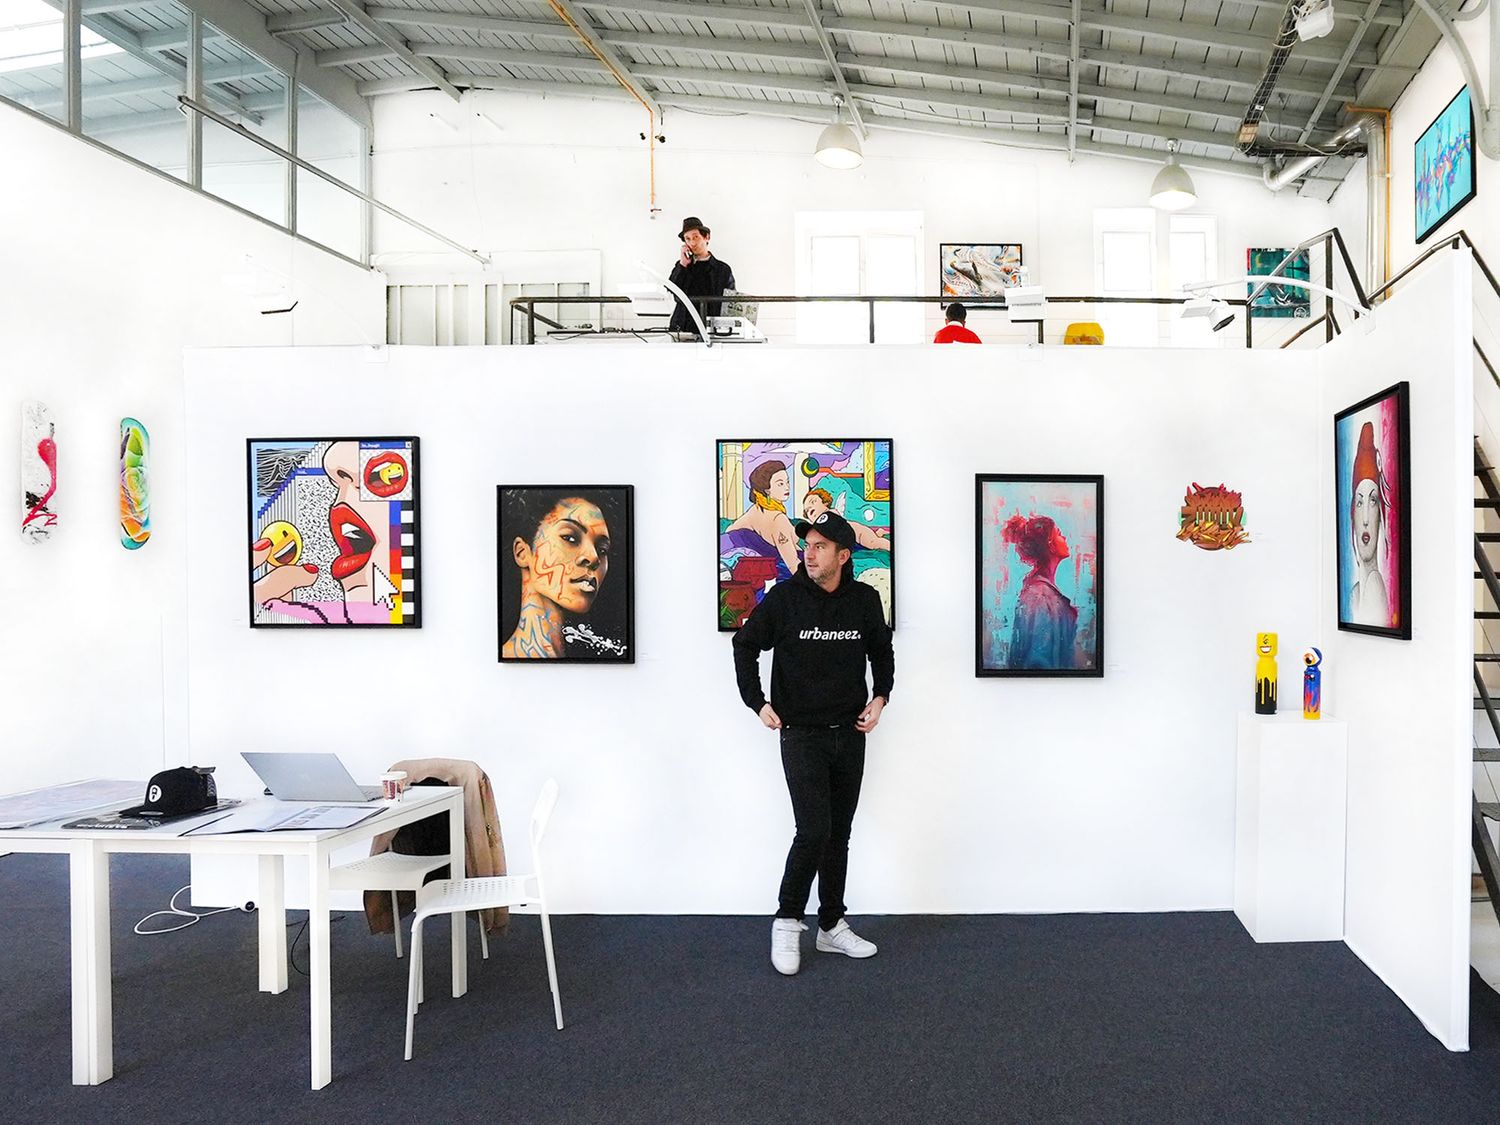 For this first participation in an physical event, Urbaneez presented a selection of some of the best artworks from its collections "Street Walls" and "Street Boards" through an atypical stand.